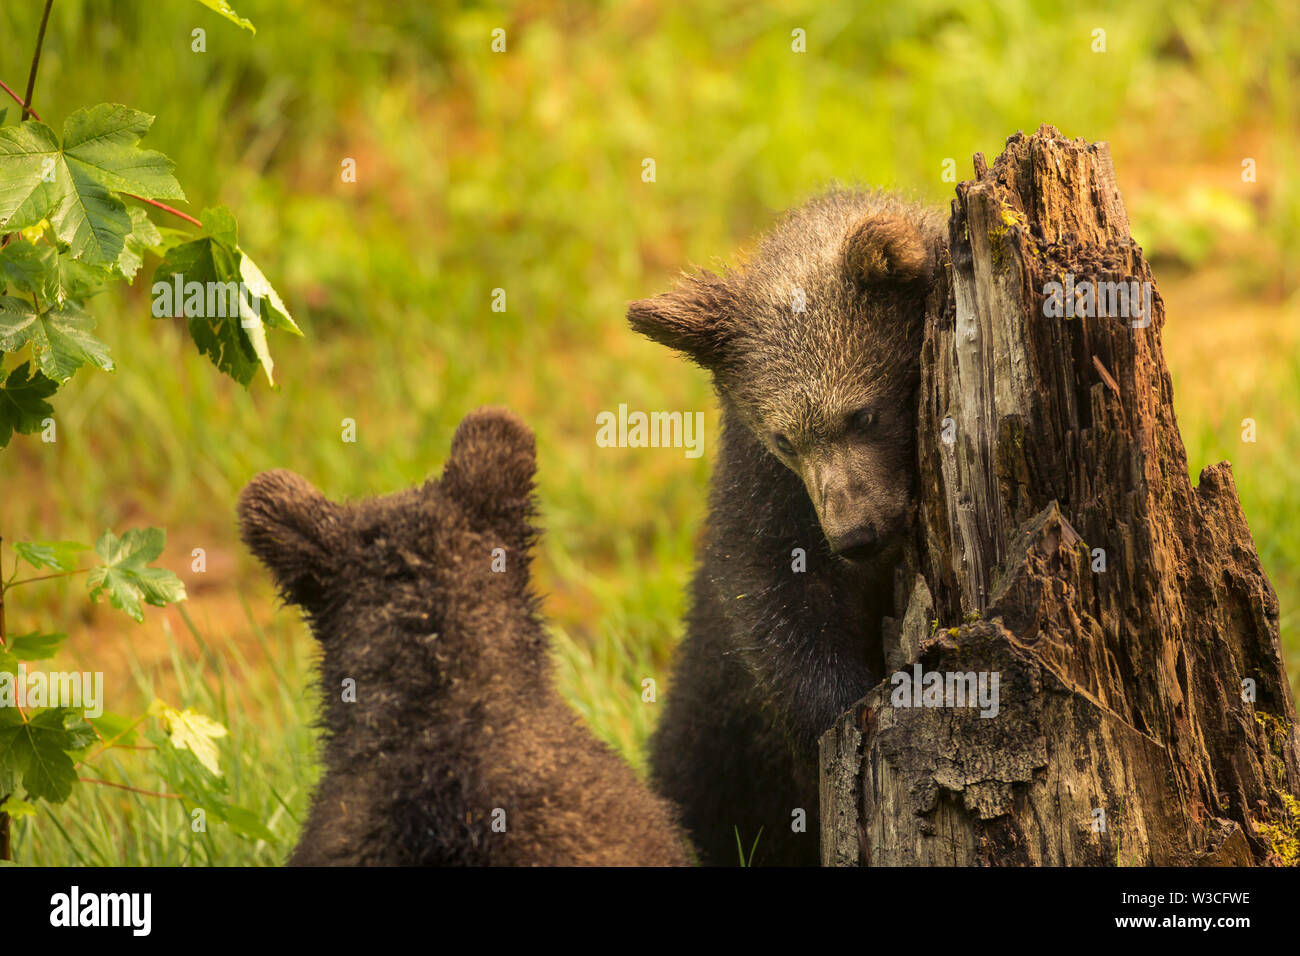 Cute brown grizzly bear family Ursus arctos playing on lying trunk of death tree in deep bush. Wildlife photography scene of secret animal family life Stock Photo